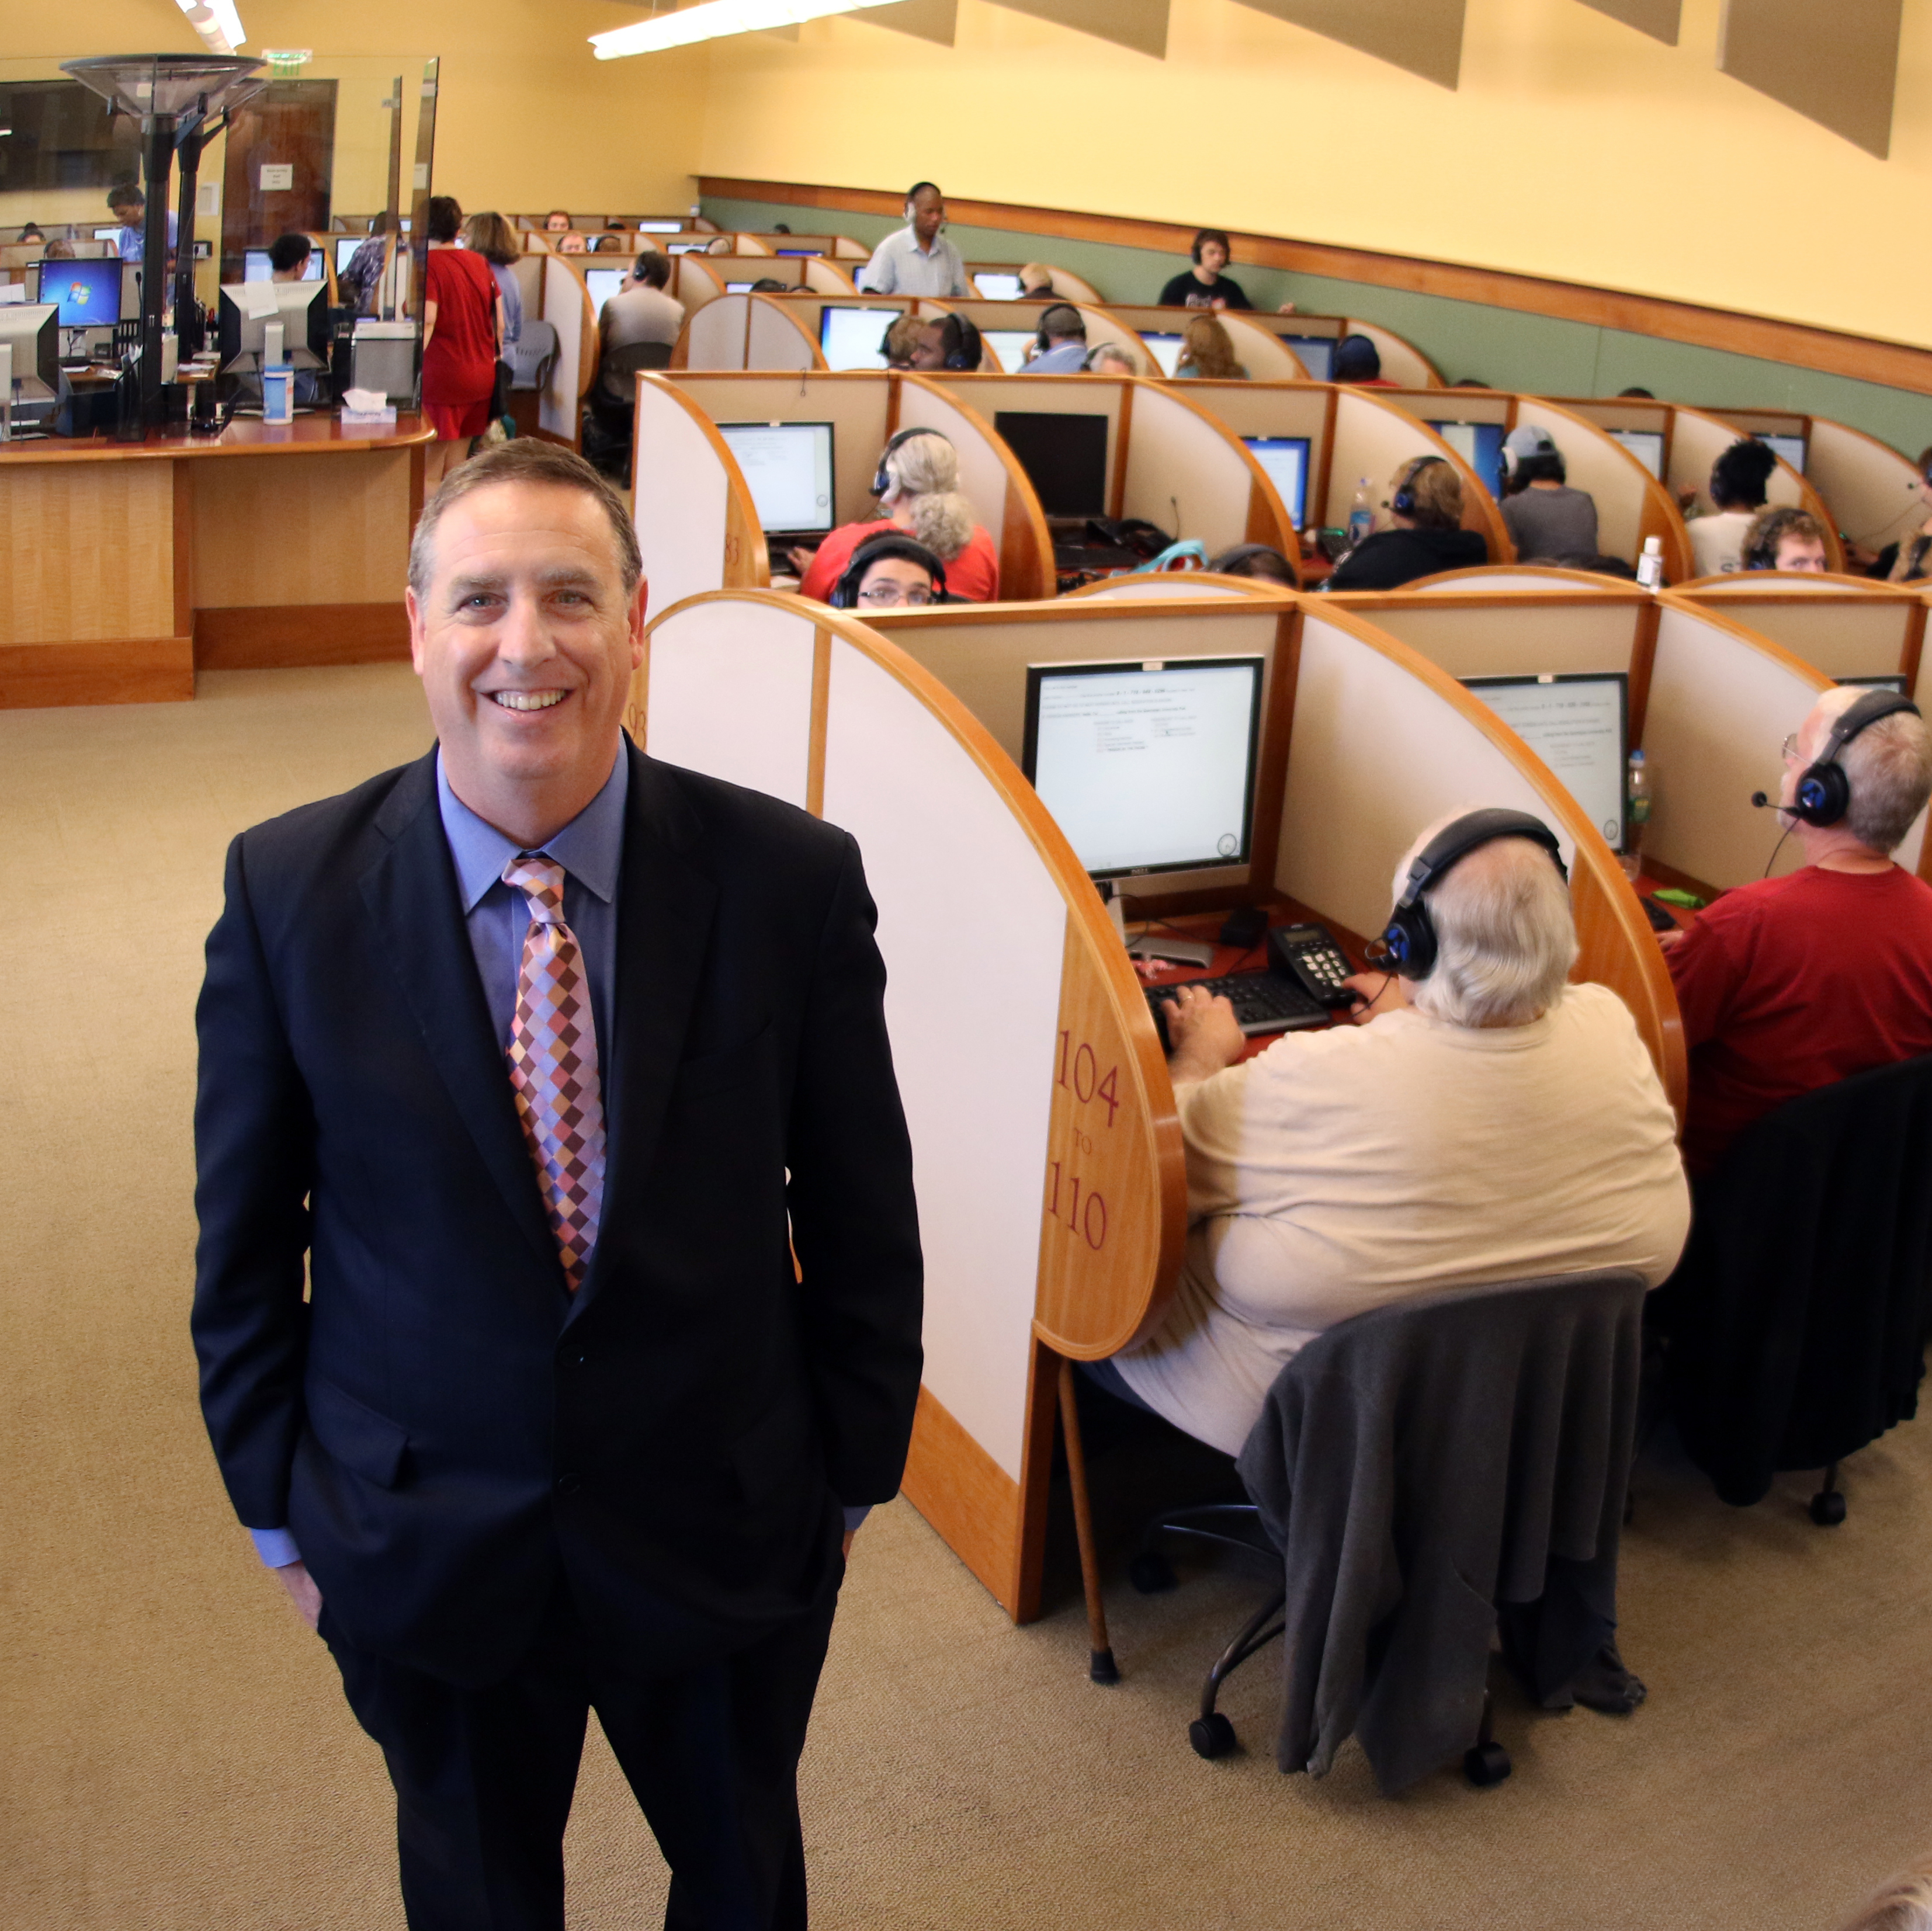 Doug Schwartz has been director of the Quinnipiac University Polling Institute since 1991, growing it from a regional outfit to a nationally recognized name in political polling.